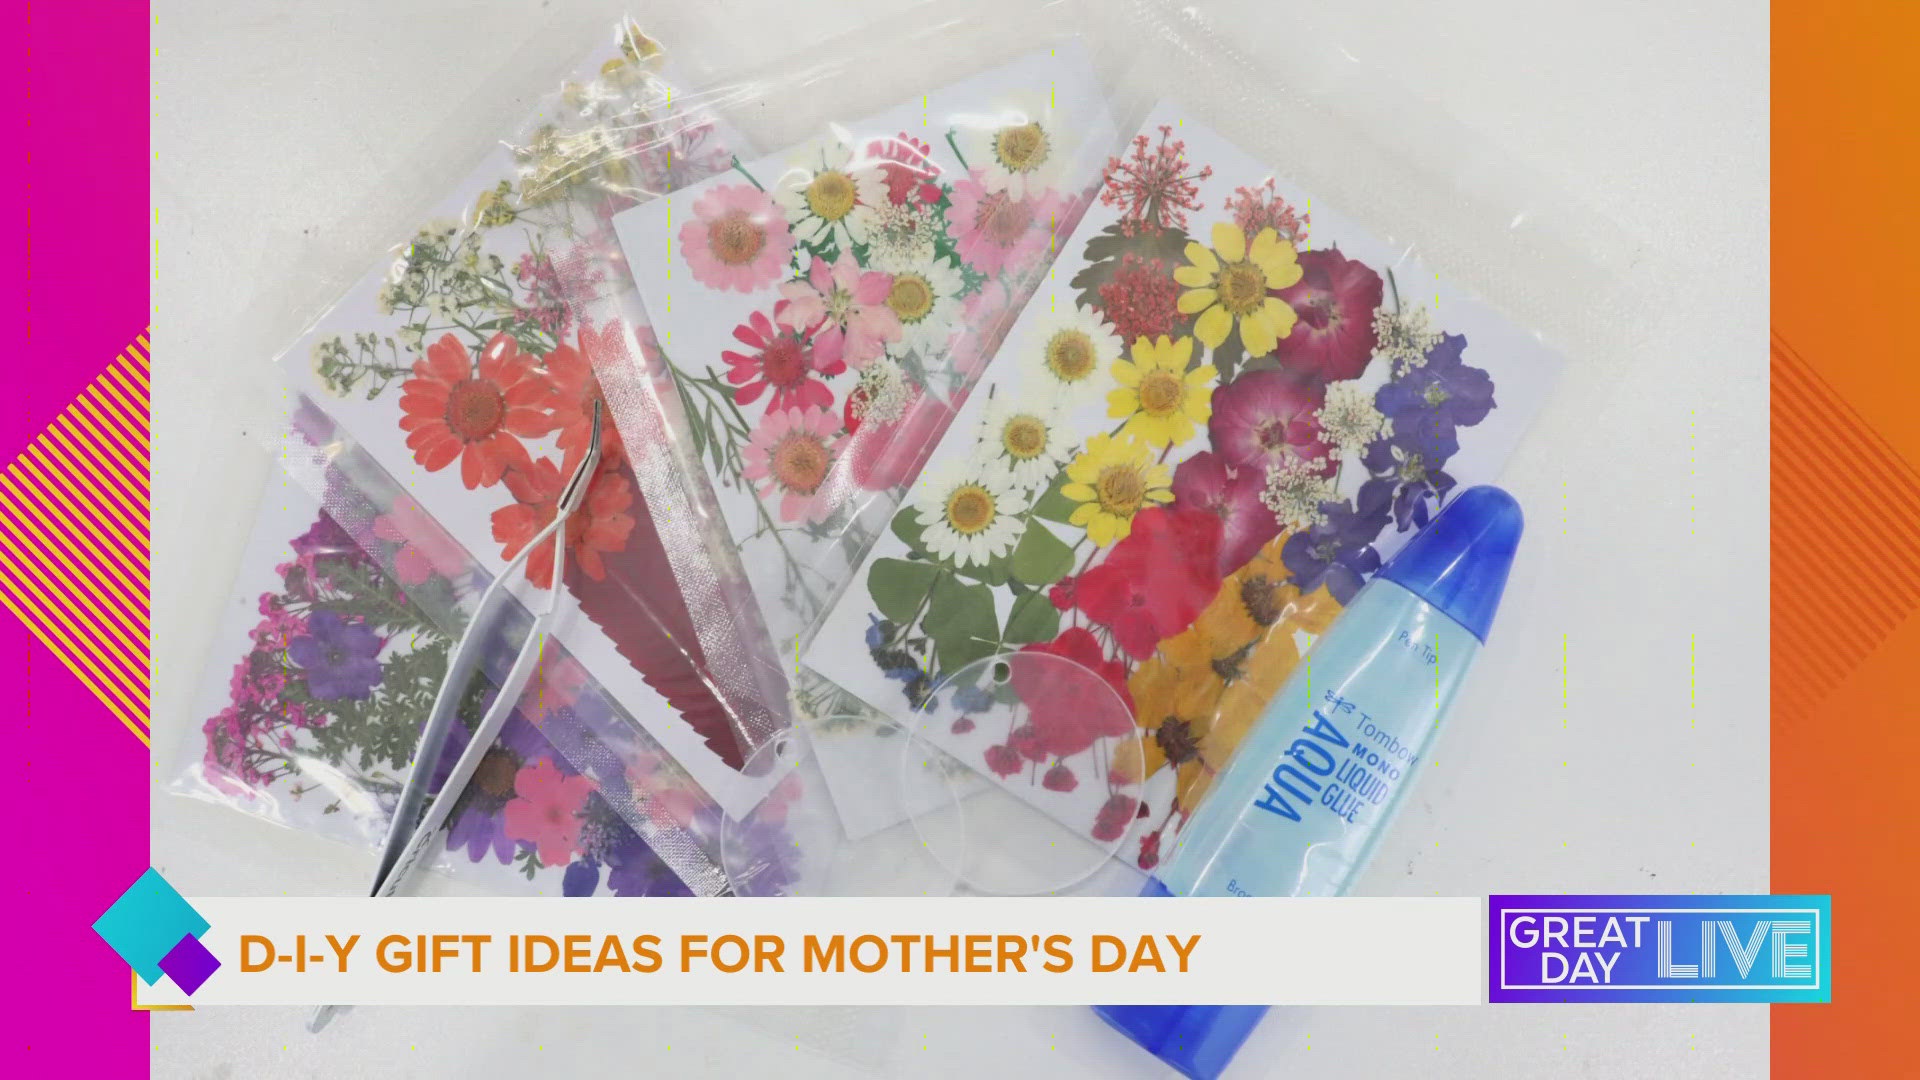 Give mom a gift that’s handmade and from the heart this Mother’s Day! Crafting expert Amy Latta shares 3 ideas. For more ideas visit amylattacreations.com